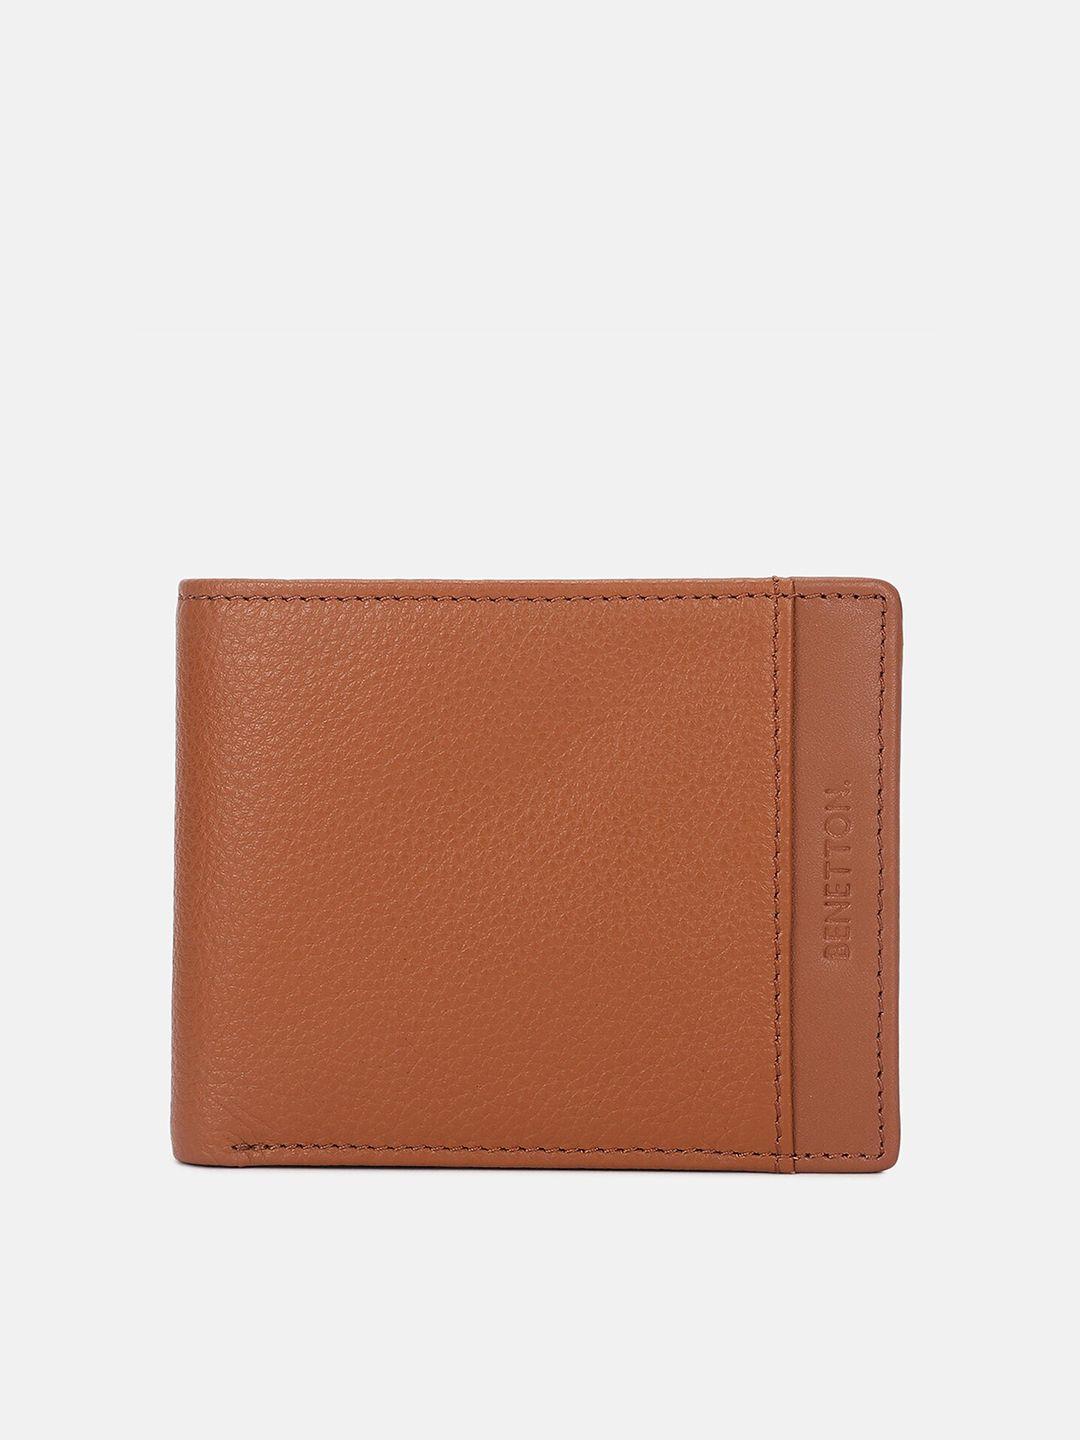 united colors of benetton men leather two fold wallet